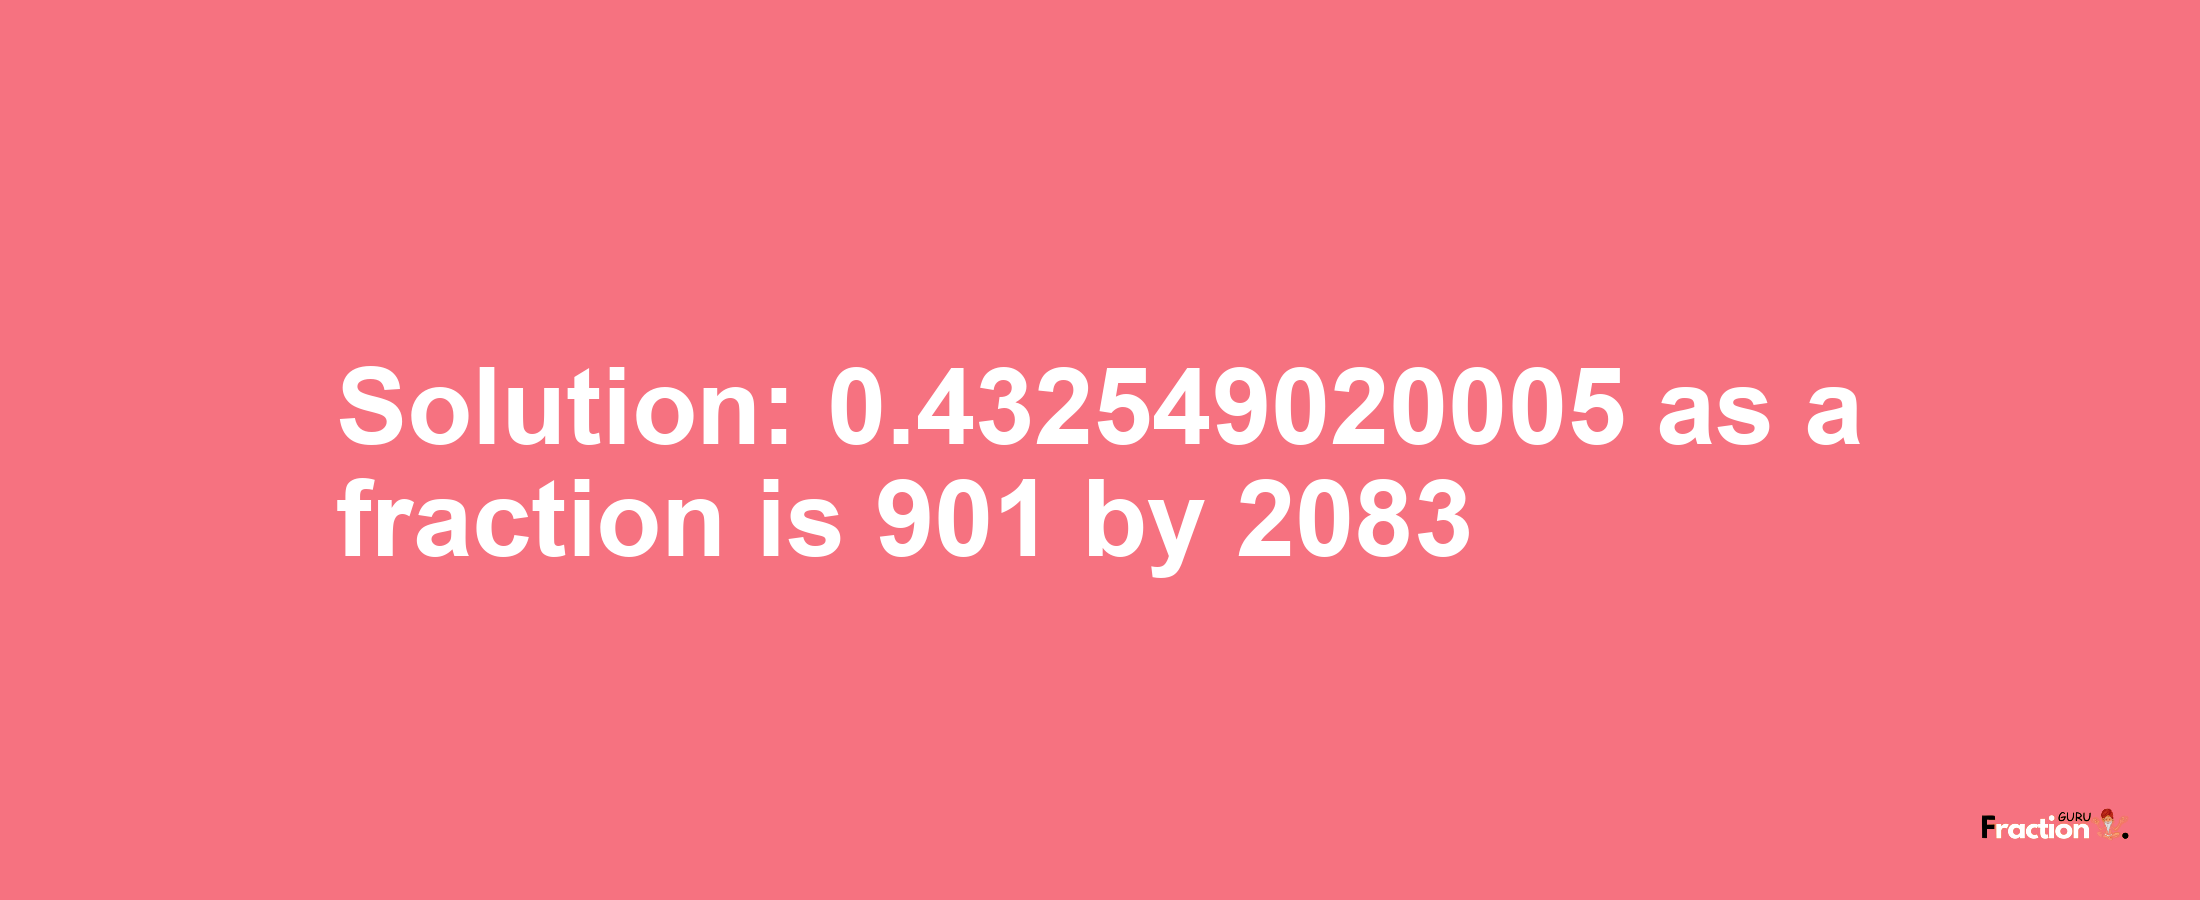 Solution:0.432549020005 as a fraction is 901/2083